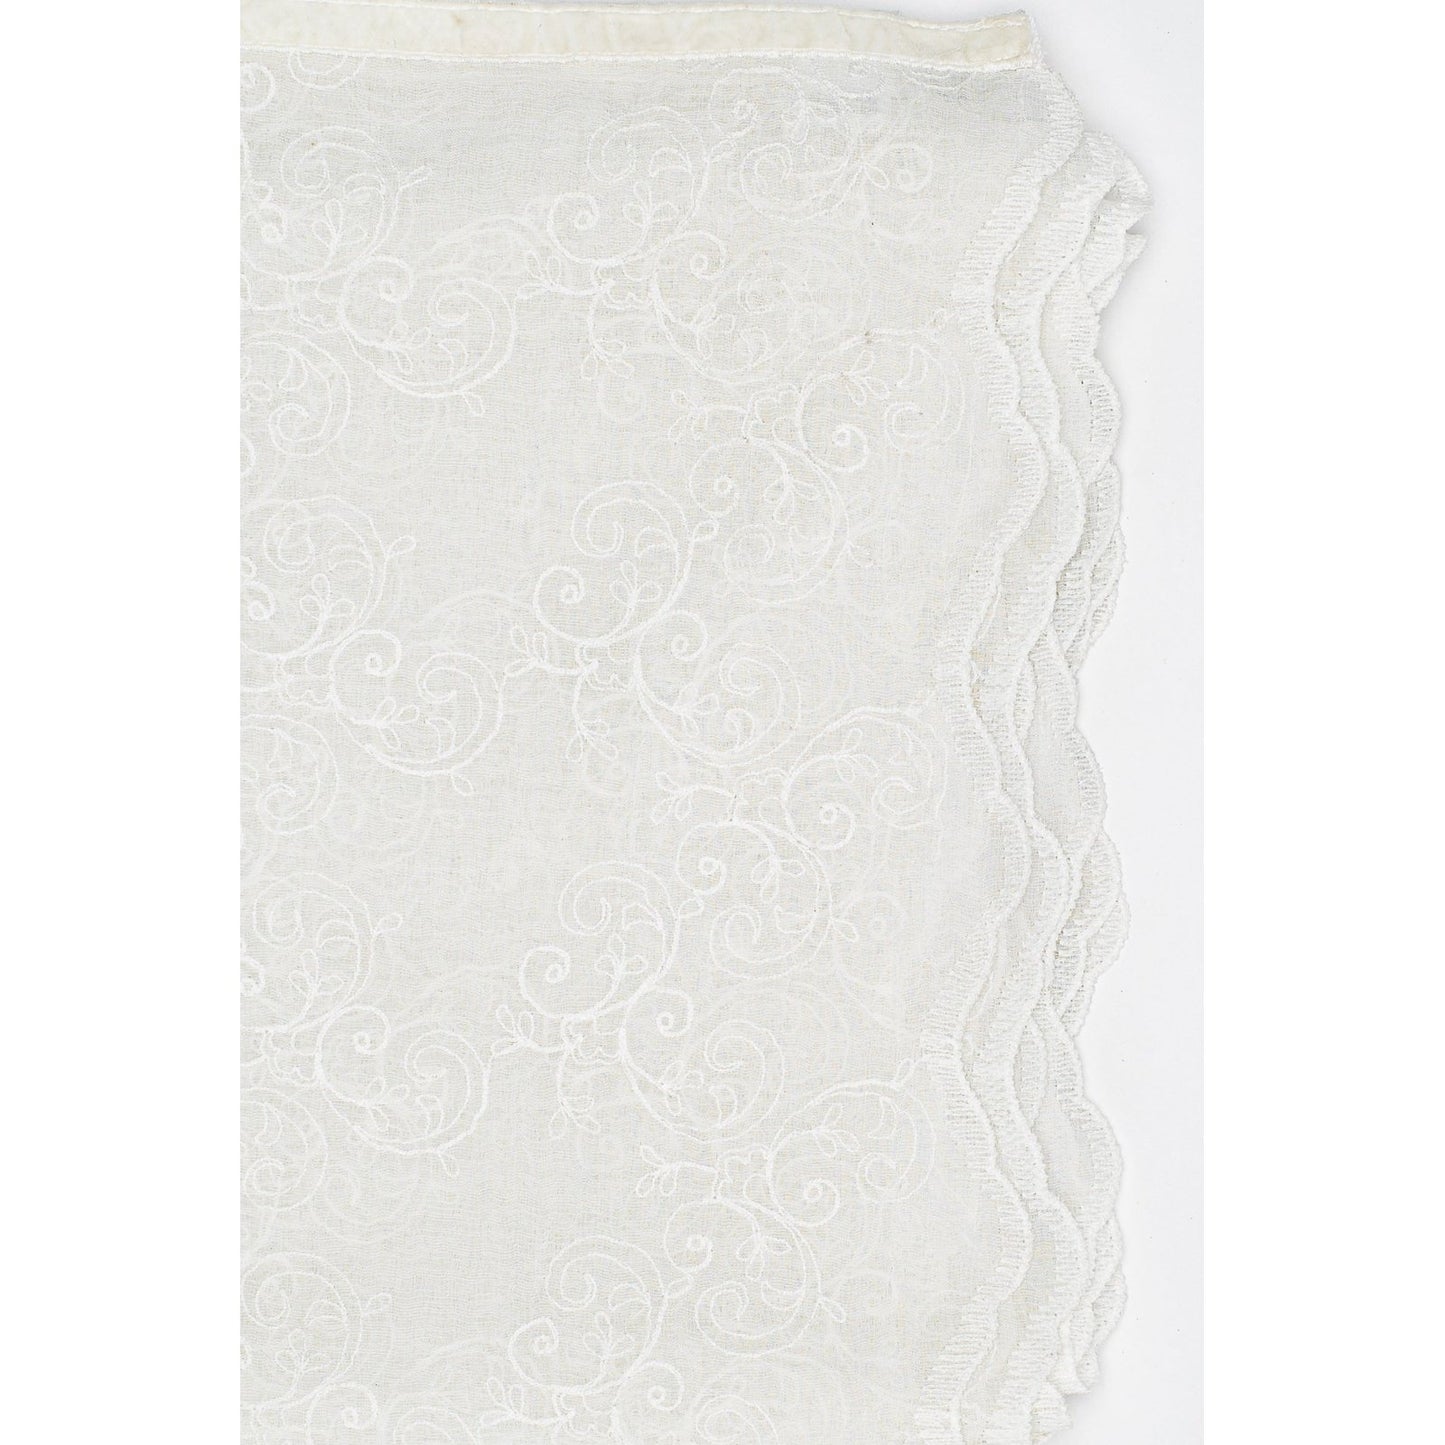 The design of this embroidered voile tablecloth is timeless. It will fit in many different interiors and give that elegant touch to your room.